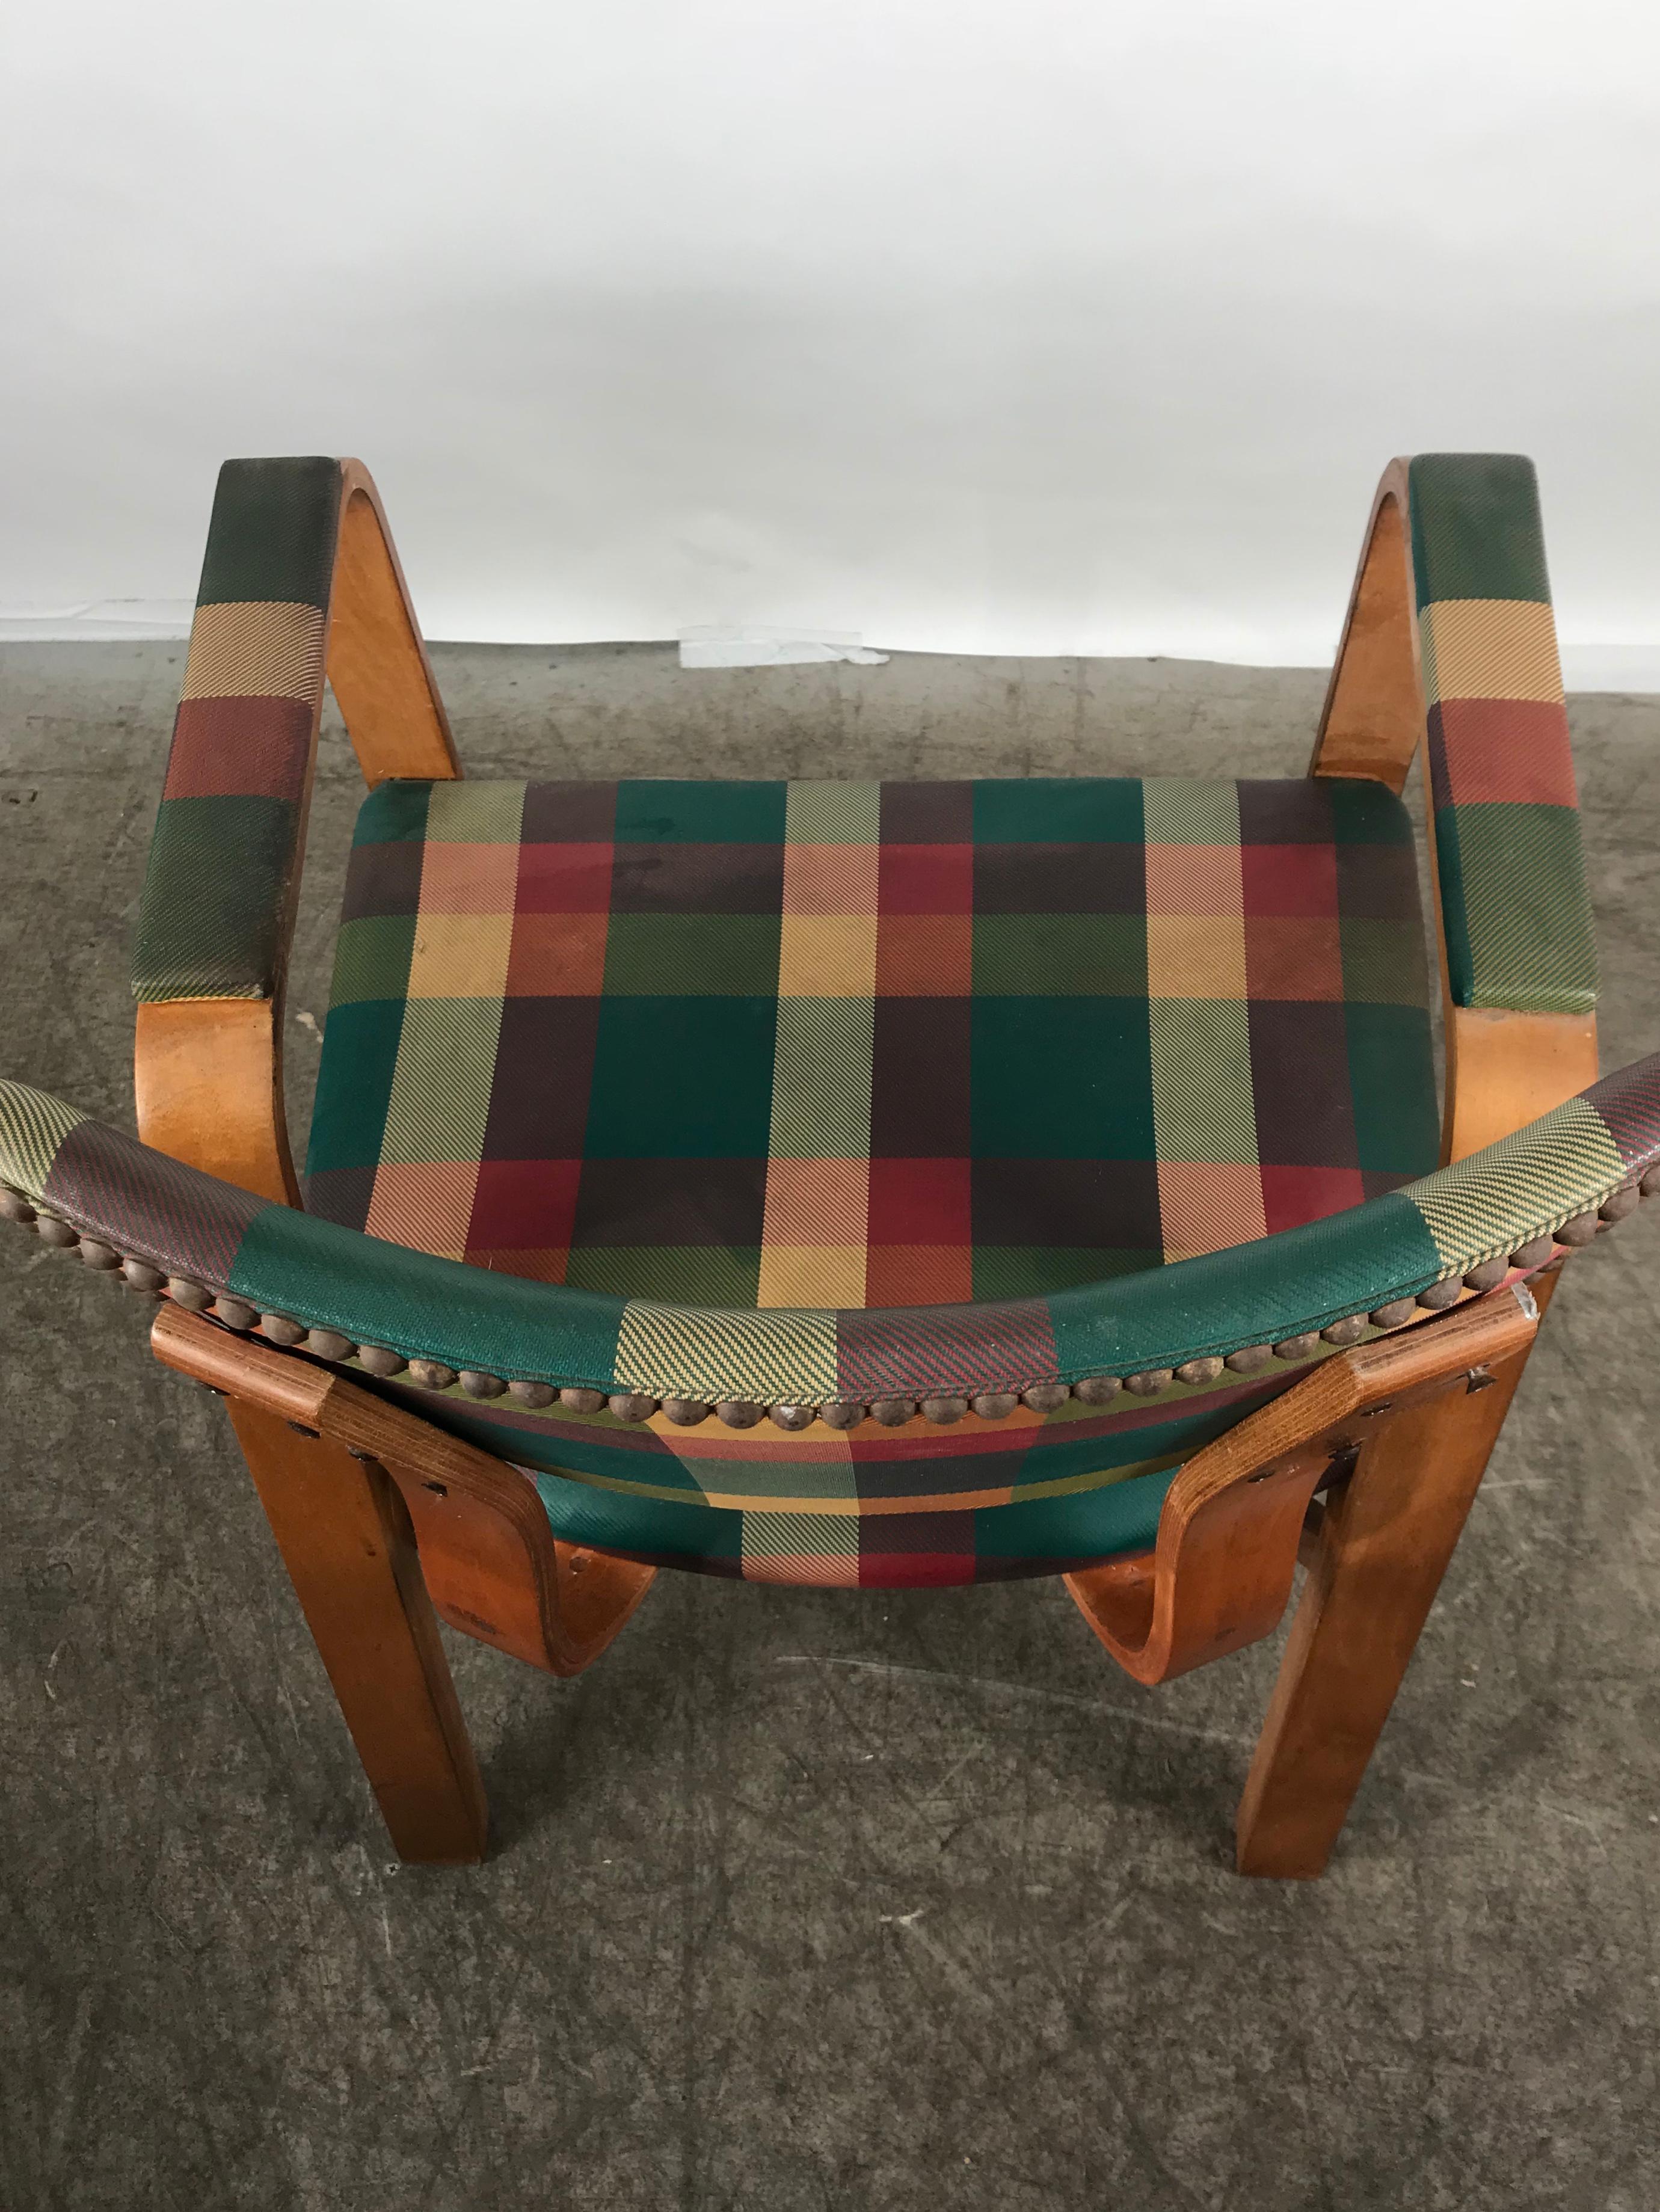 Classic Bentwood Armchair with Original Plaid Oil Cloth by Thonet Brothers 1940 In Good Condition For Sale In Buffalo, NY